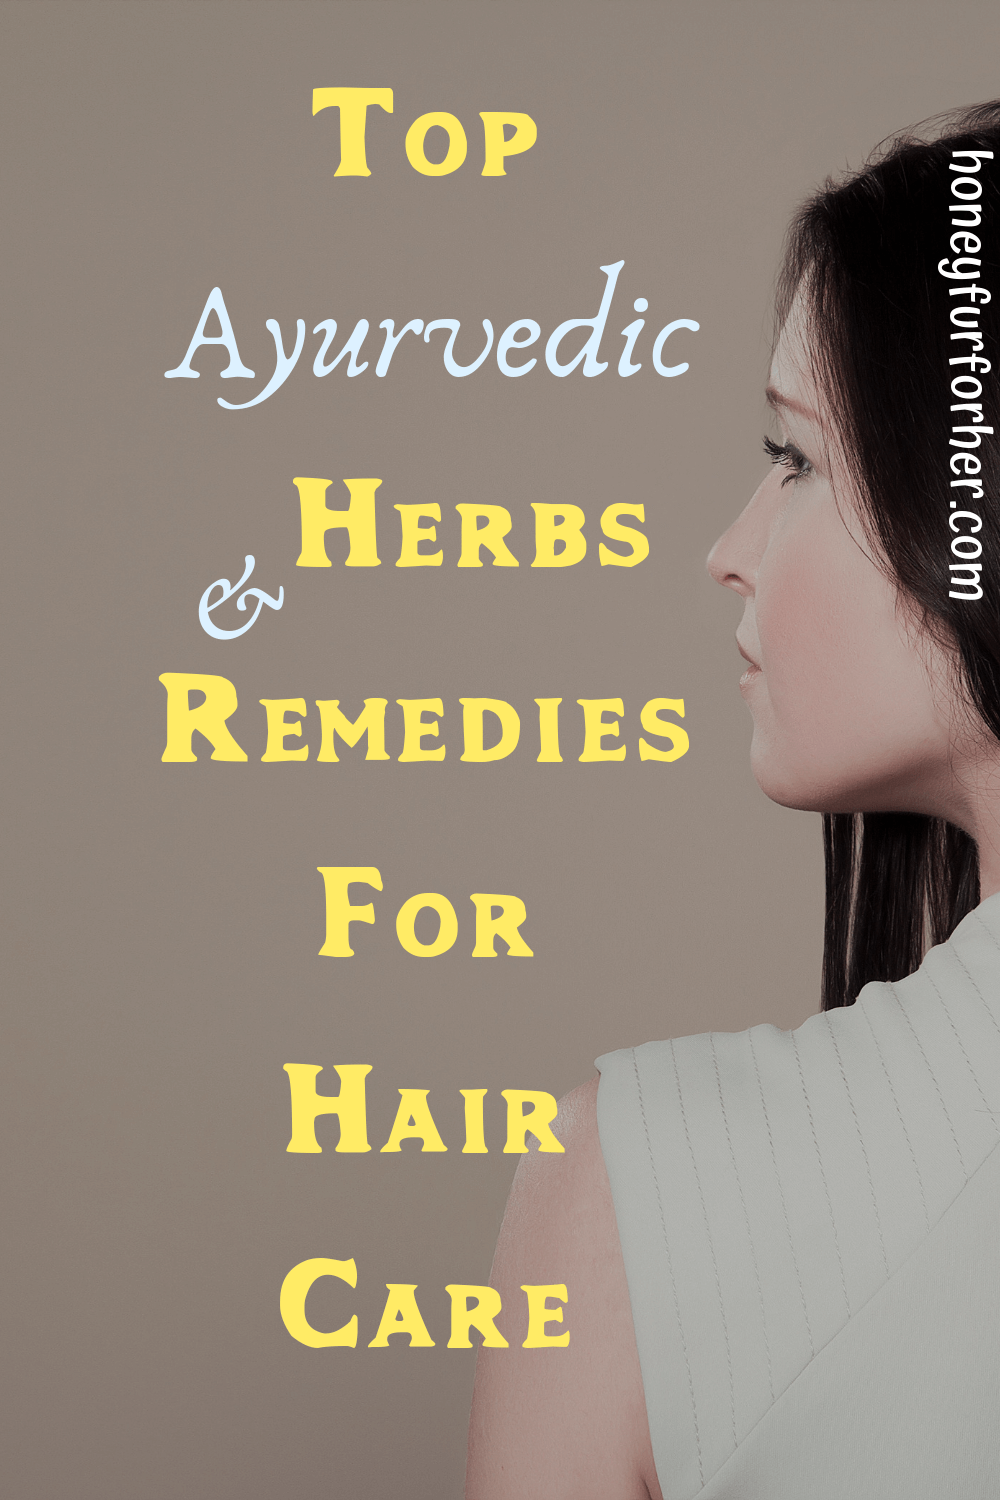 Top Ayurvedic Herbs And Remedies For Hair Care Pinterest Pin Graphics